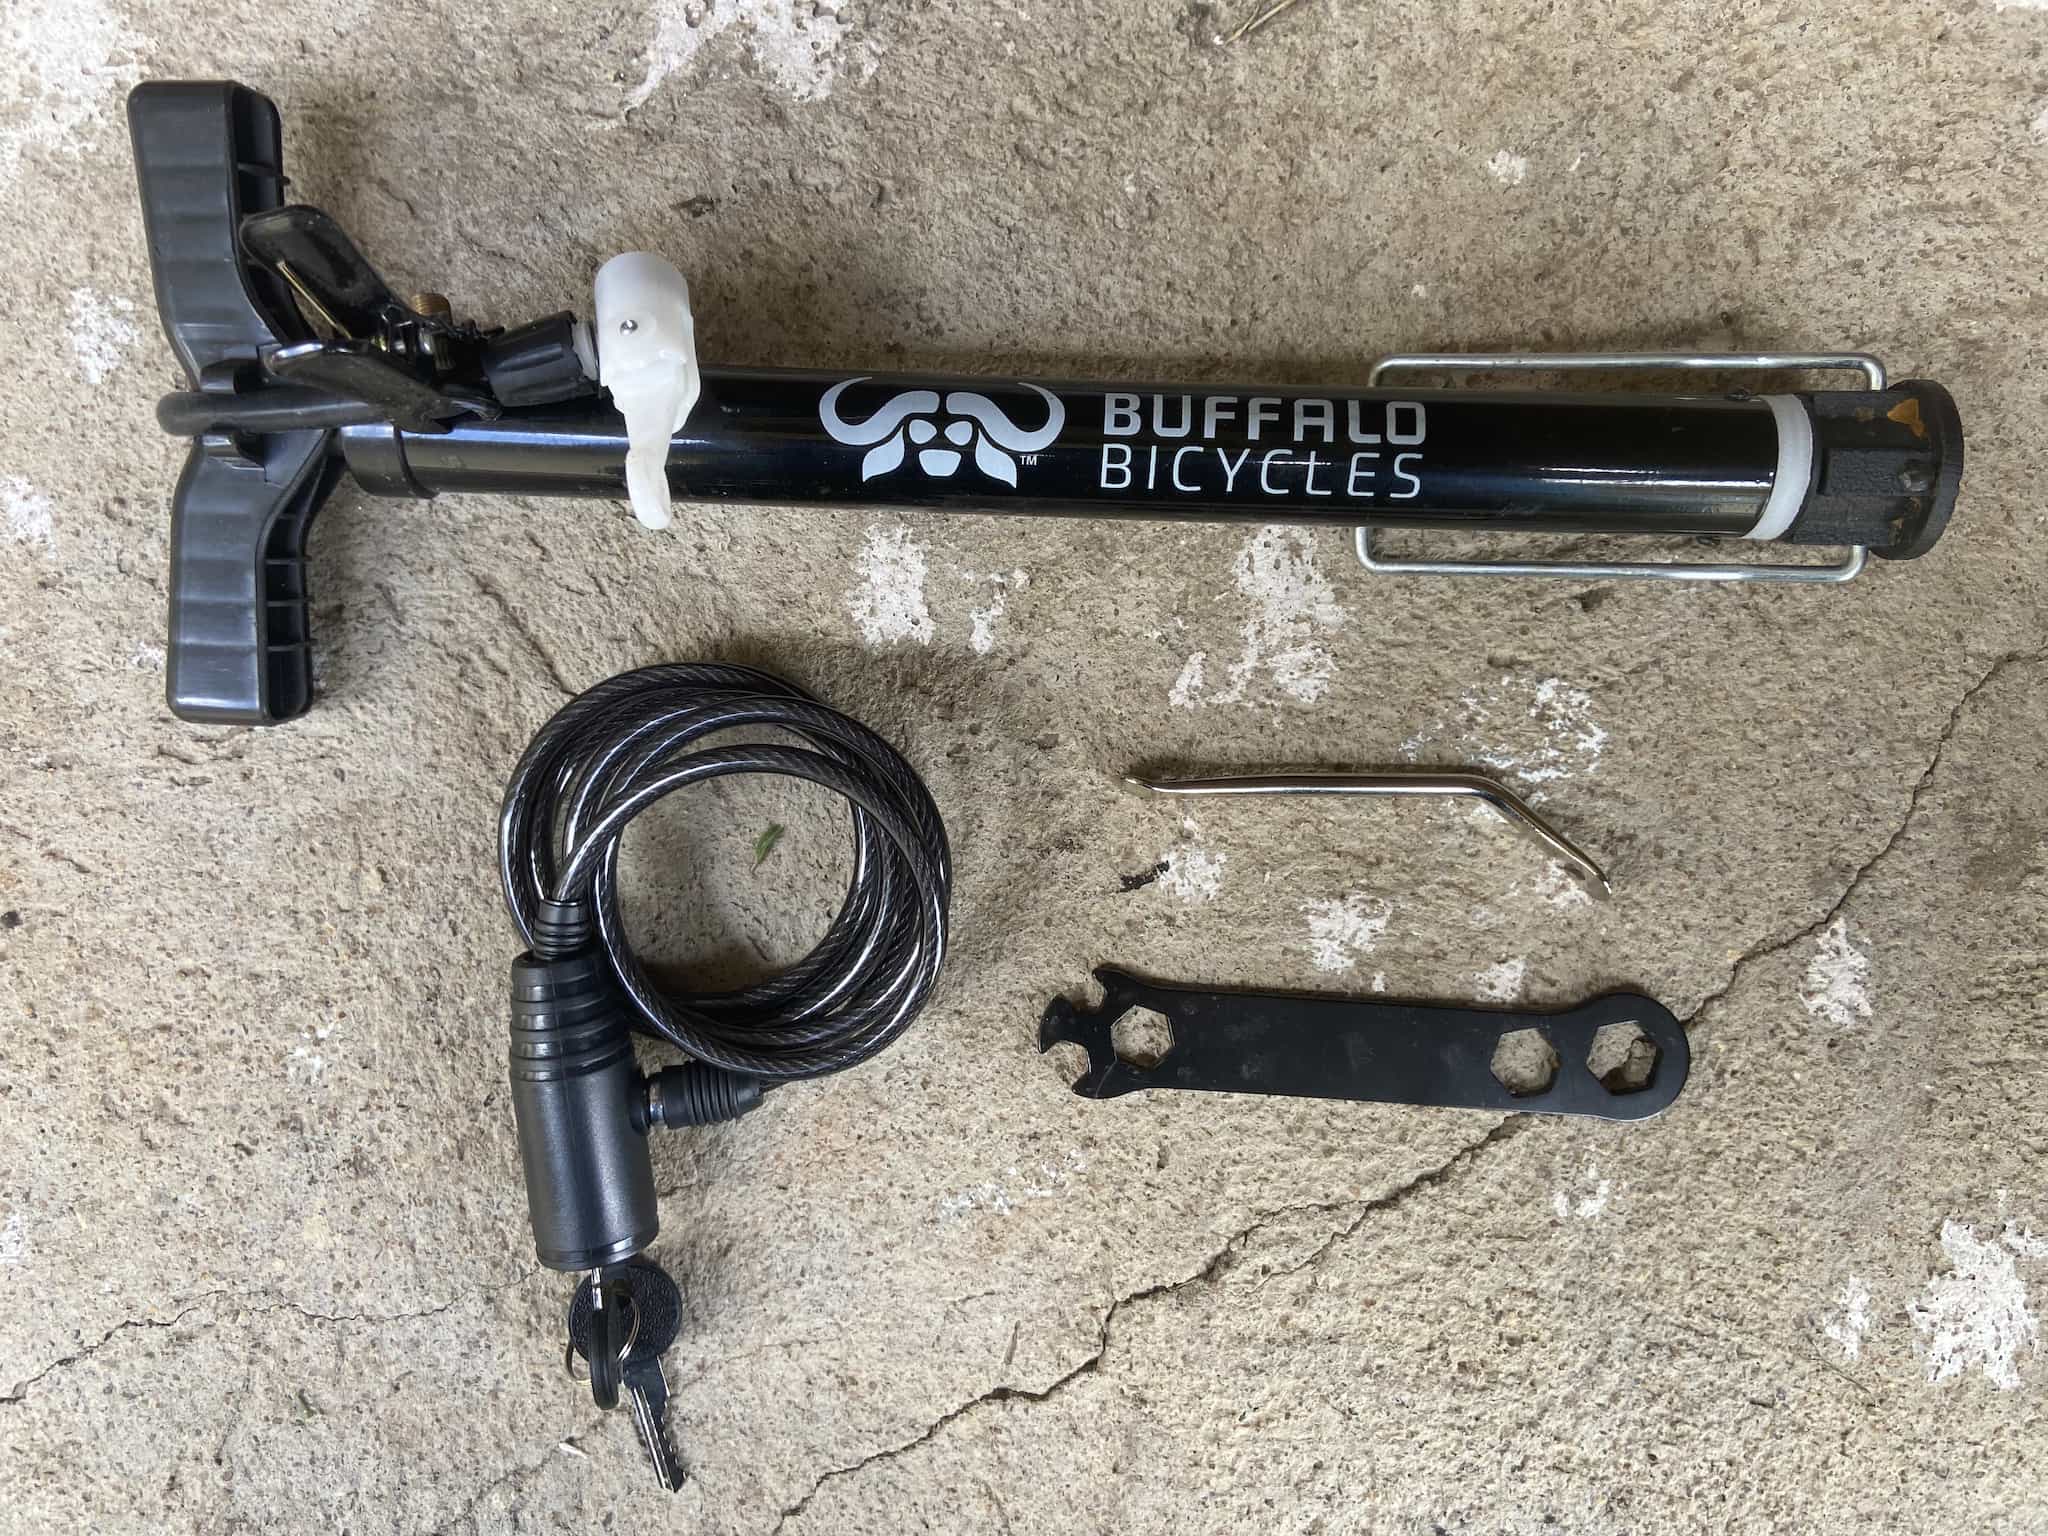 A bike pump, lock and two tools